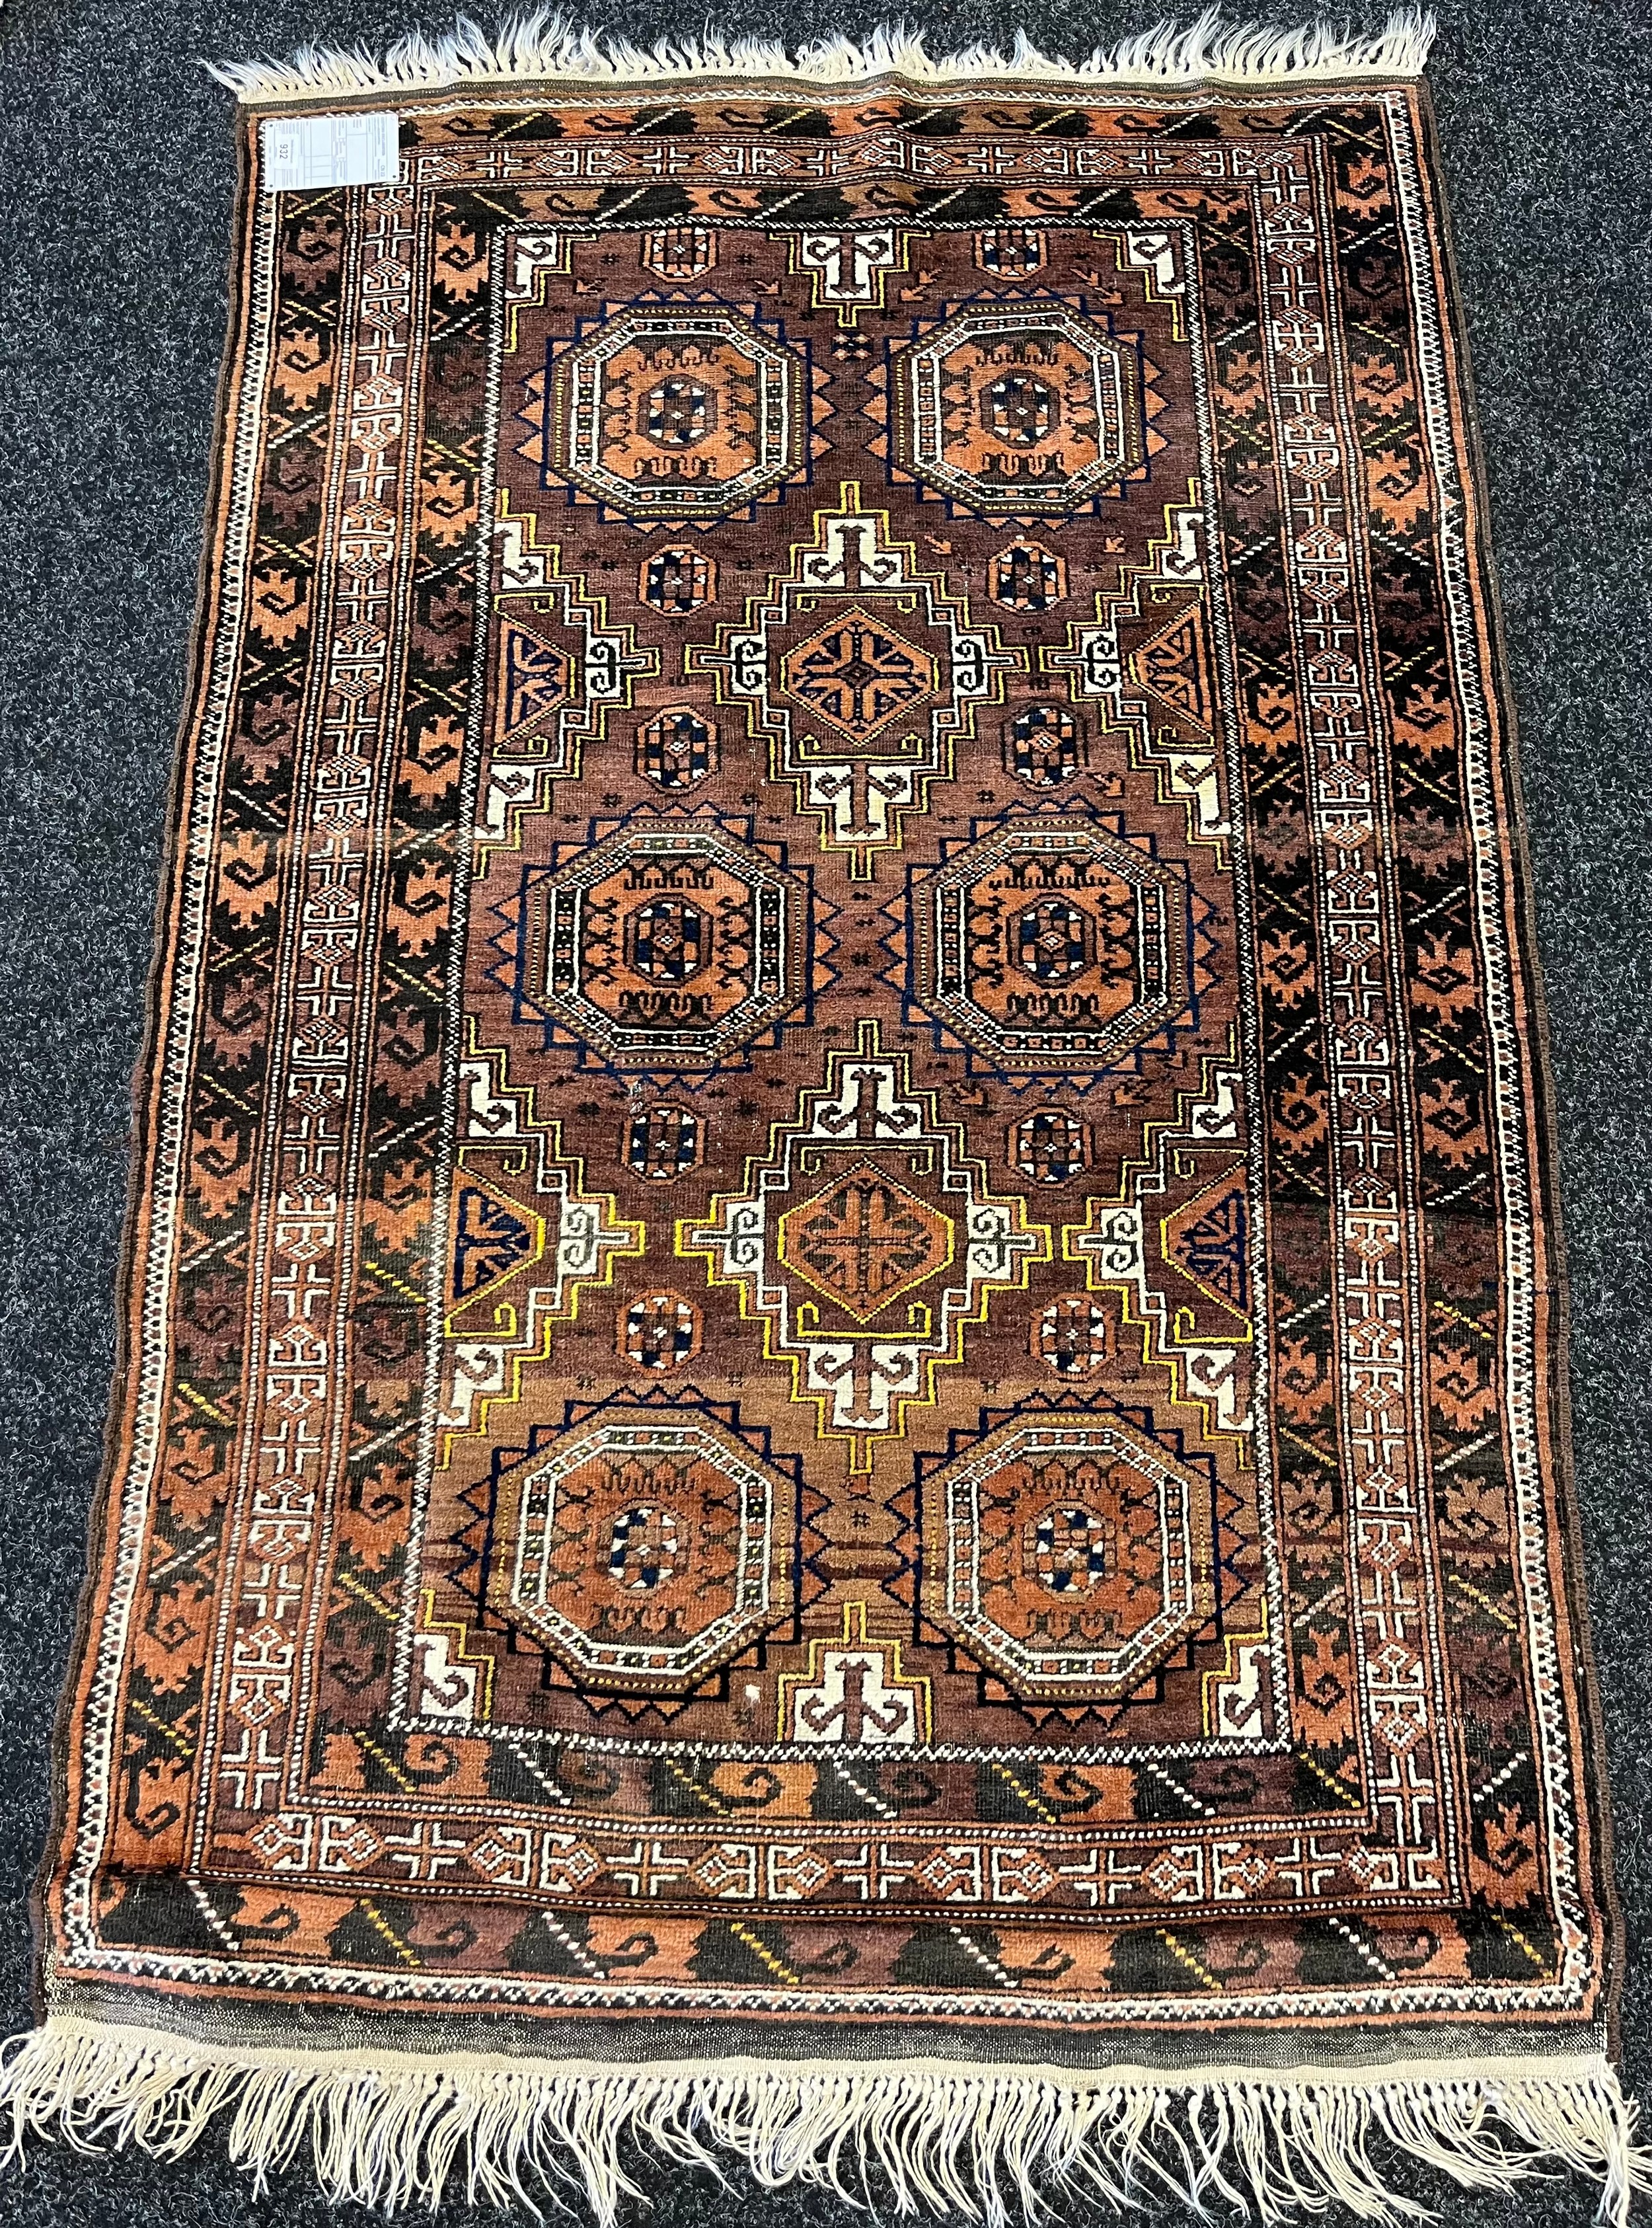 Hand woven Afghan style rug, brown ground [169x111cm]